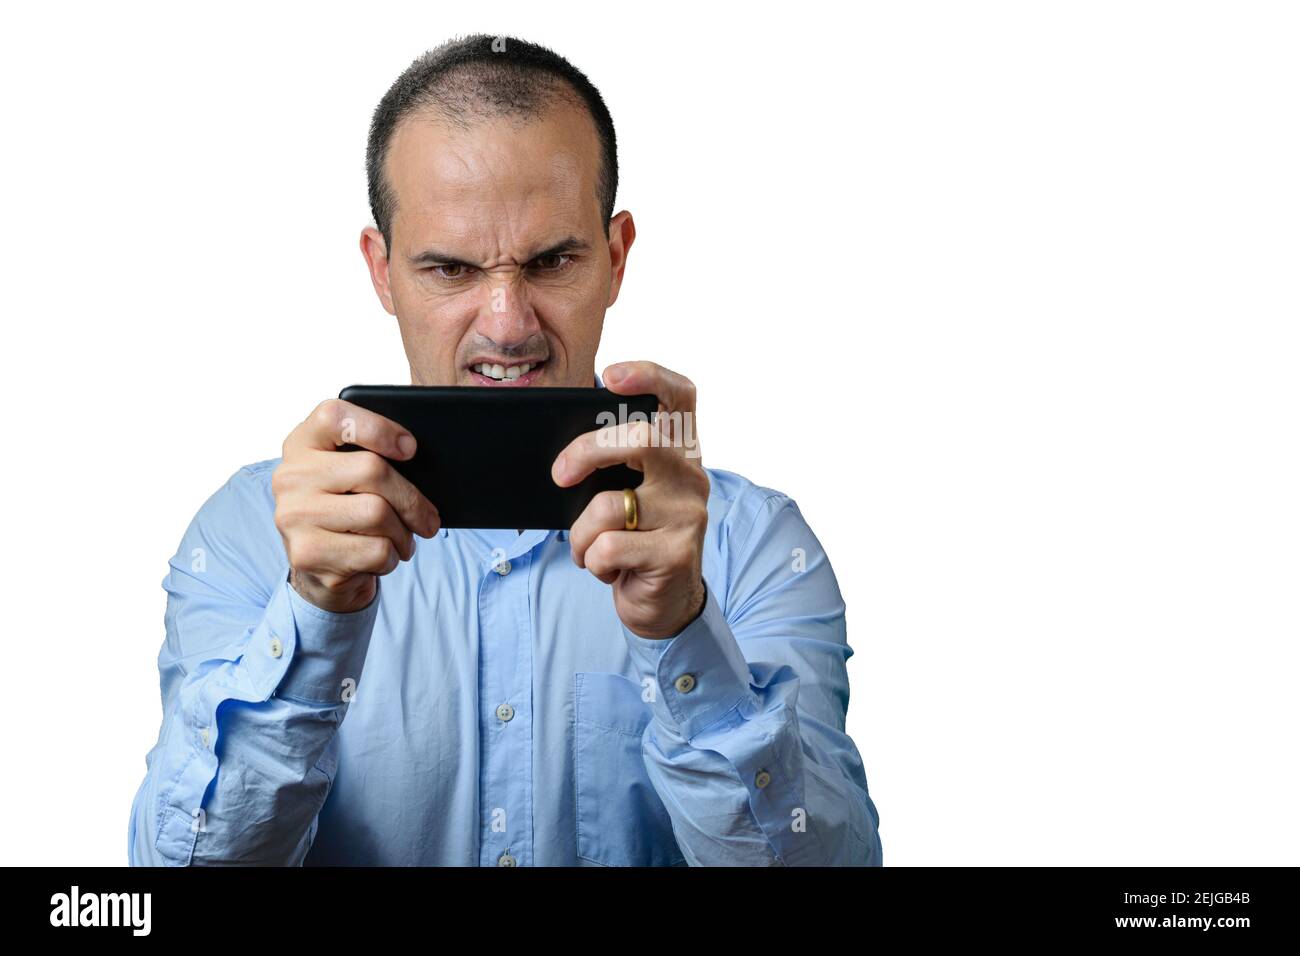 Mature man in formal wear playing on his smartphone and gritting his teeth. Stock Photo